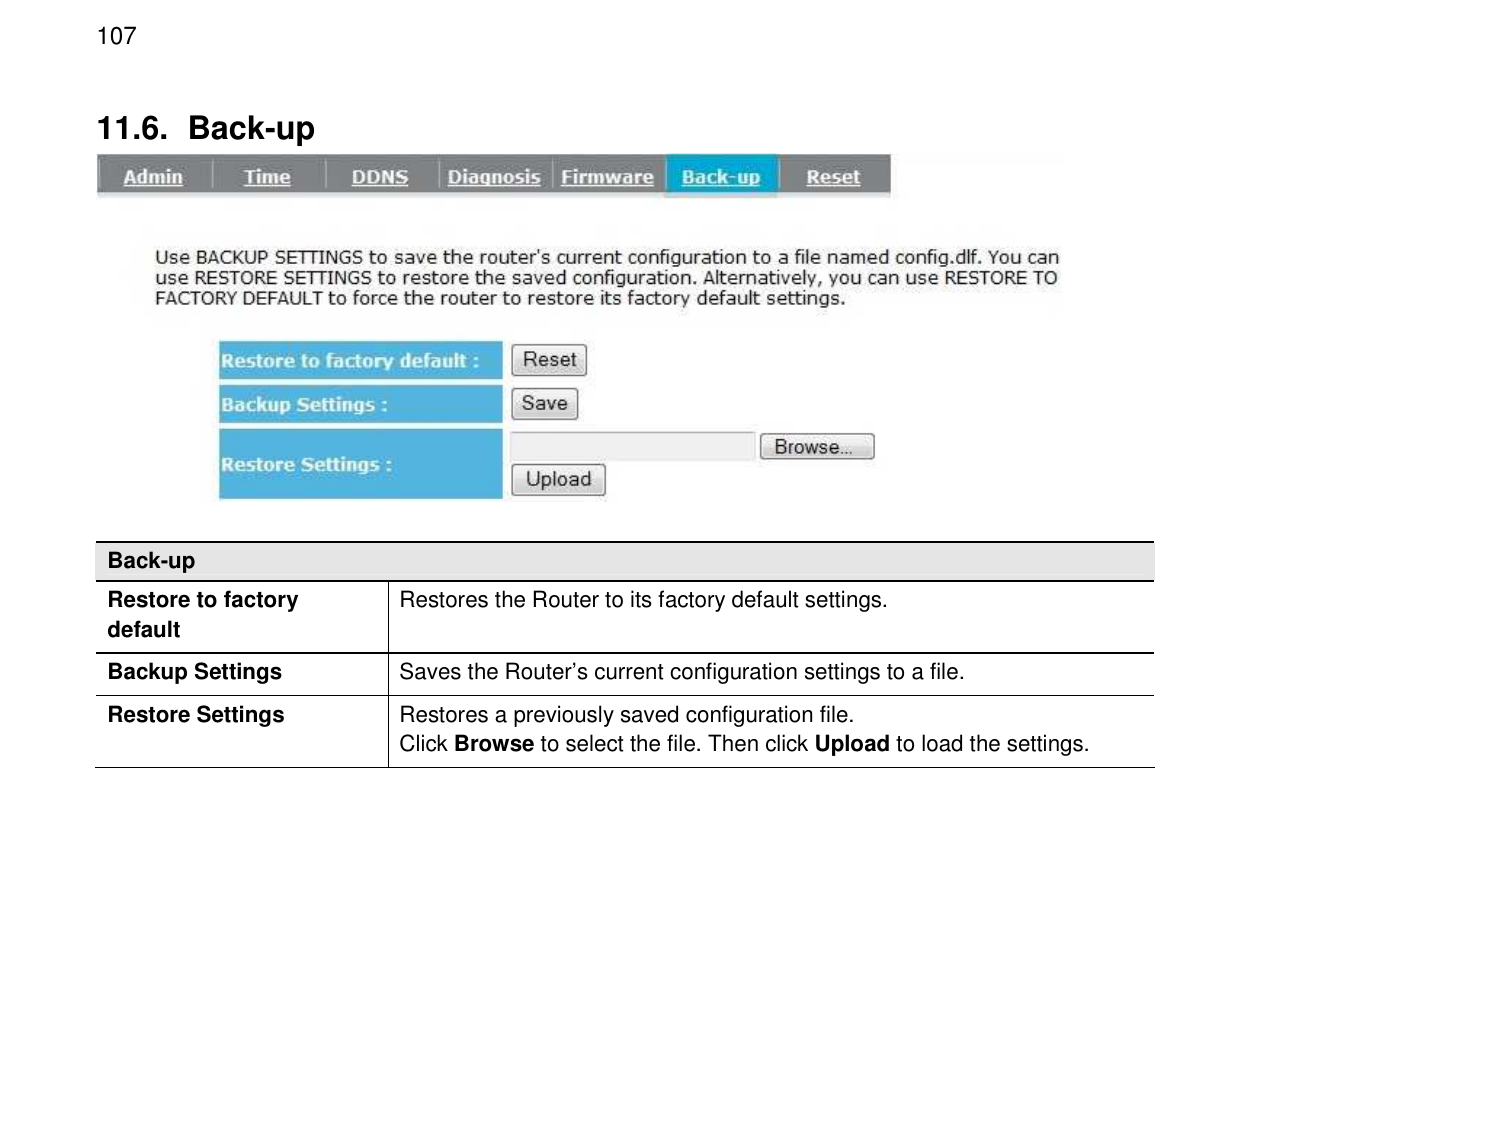  107 11.6.  Back-up   Back-up Restore to factory default Restores the Router to its factory default settings. Backup Settings  Saves the Router’s current configuration settings to a file. Restore Settings  Restores a previously saved configuration file. Click Browse to select the file. Then click Upload to load the settings.  